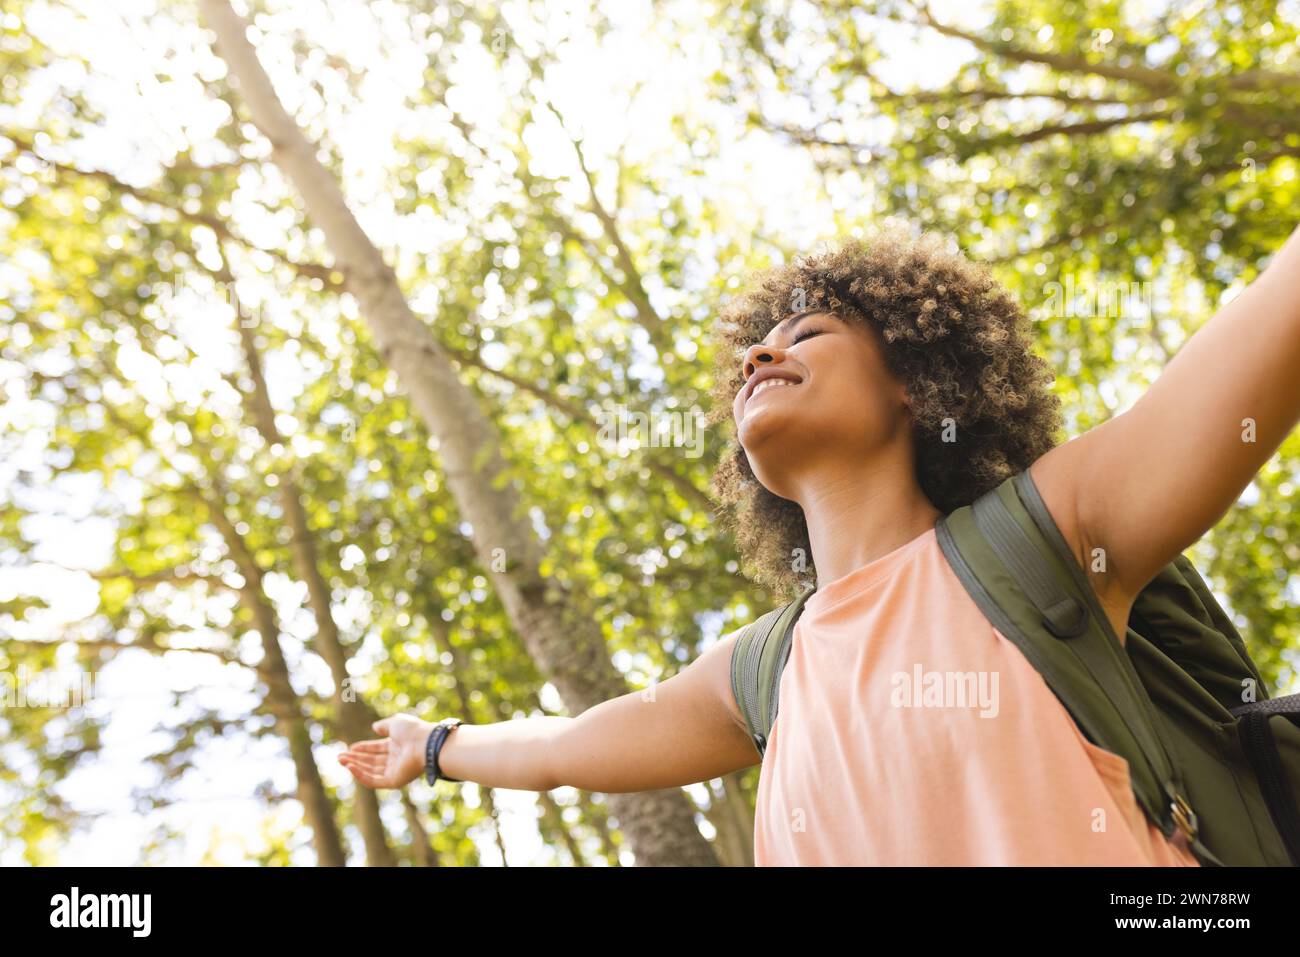 Biracial woman finds joy in nature, symbolizing freedom. Stock Photo